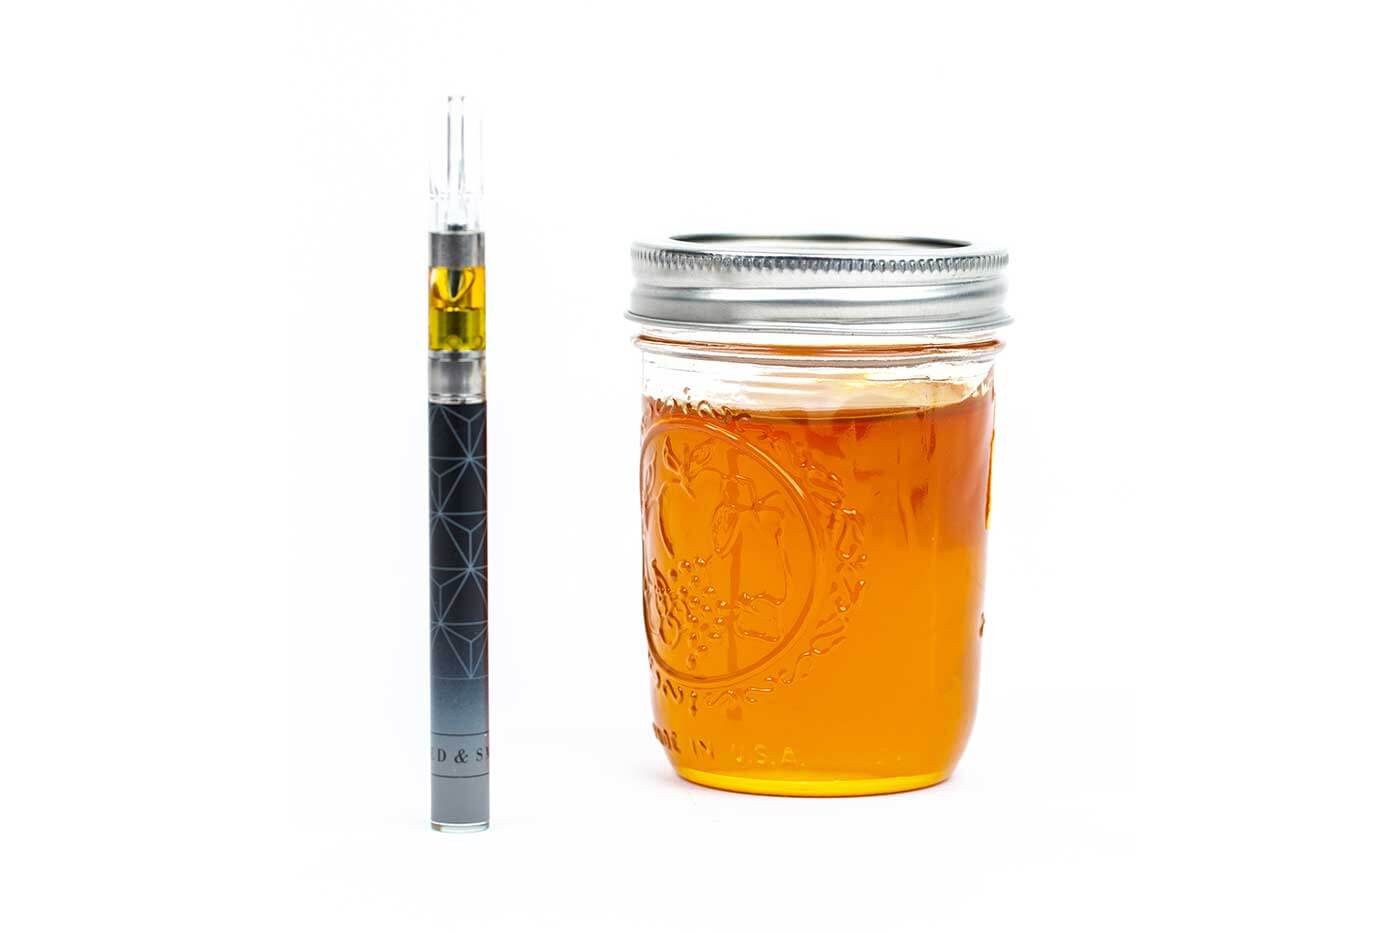 Live Distillate Cannabis Concentrates - Seed & Smith